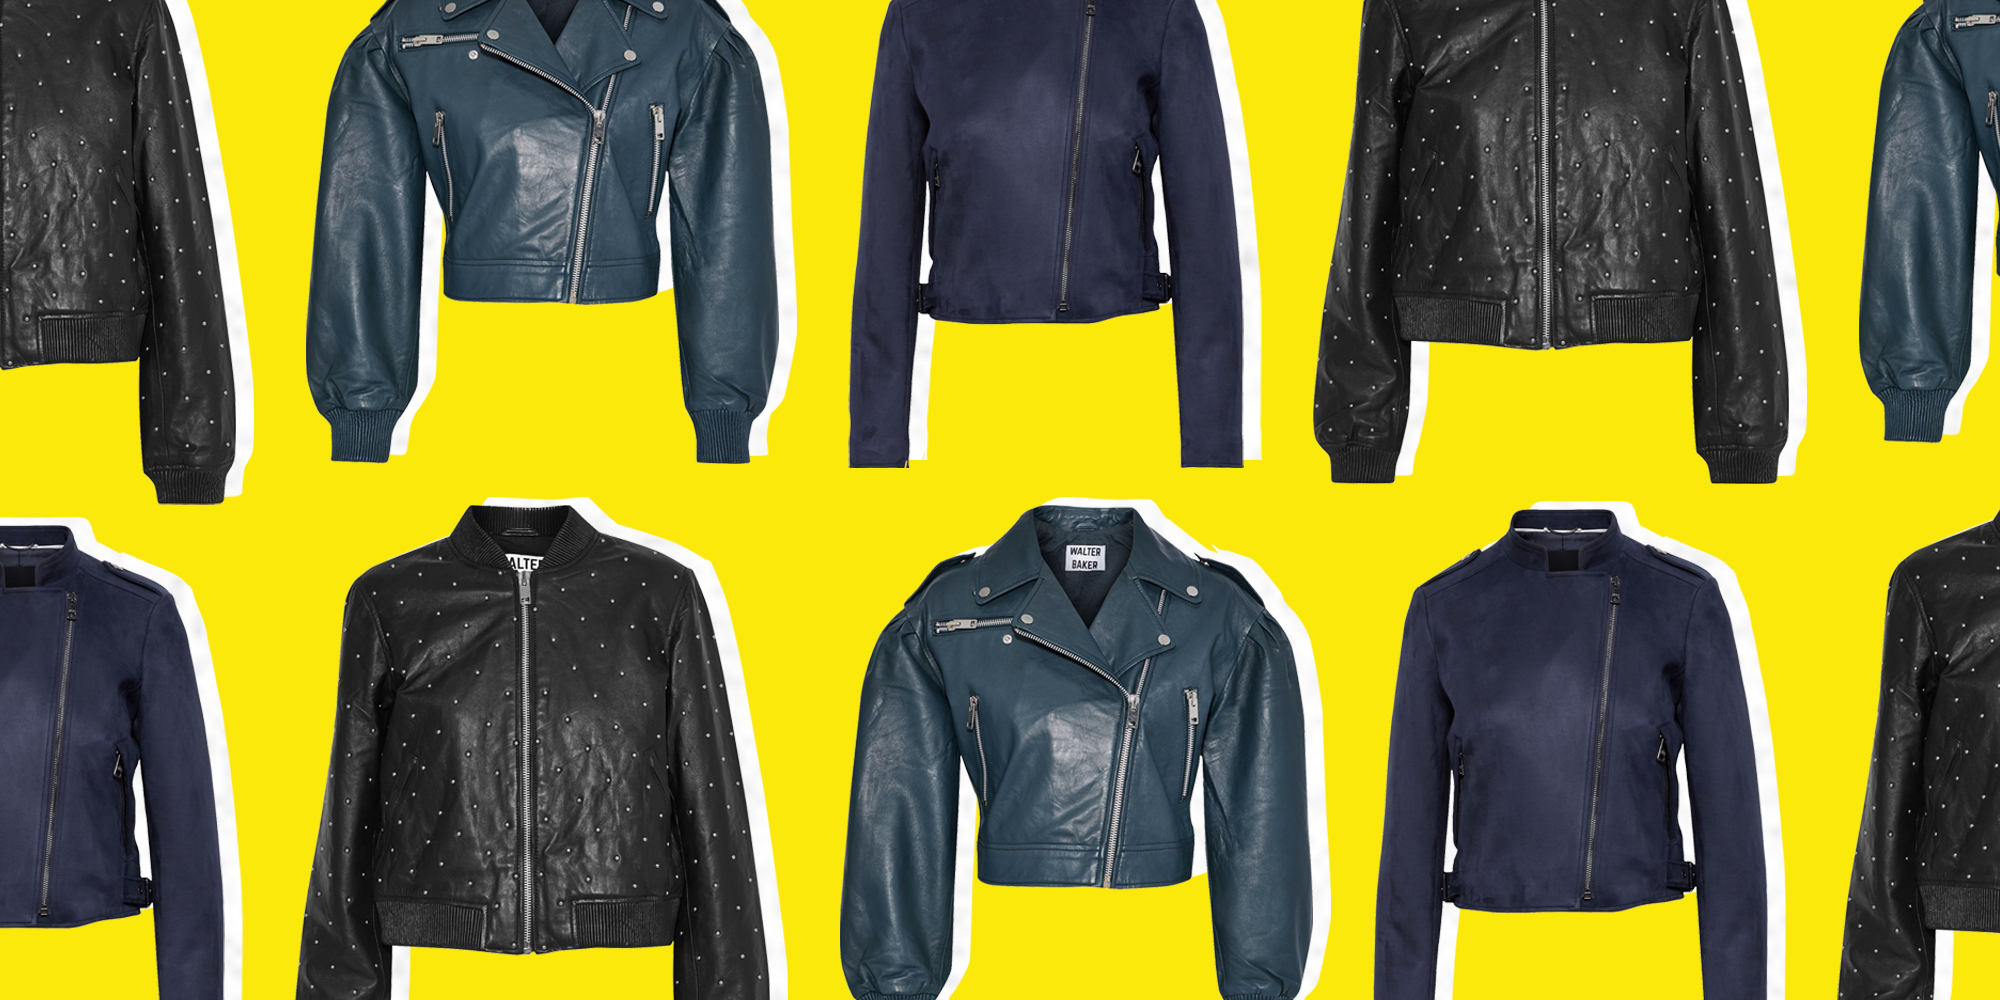 20 Best Leather Jackets for Women 2020 